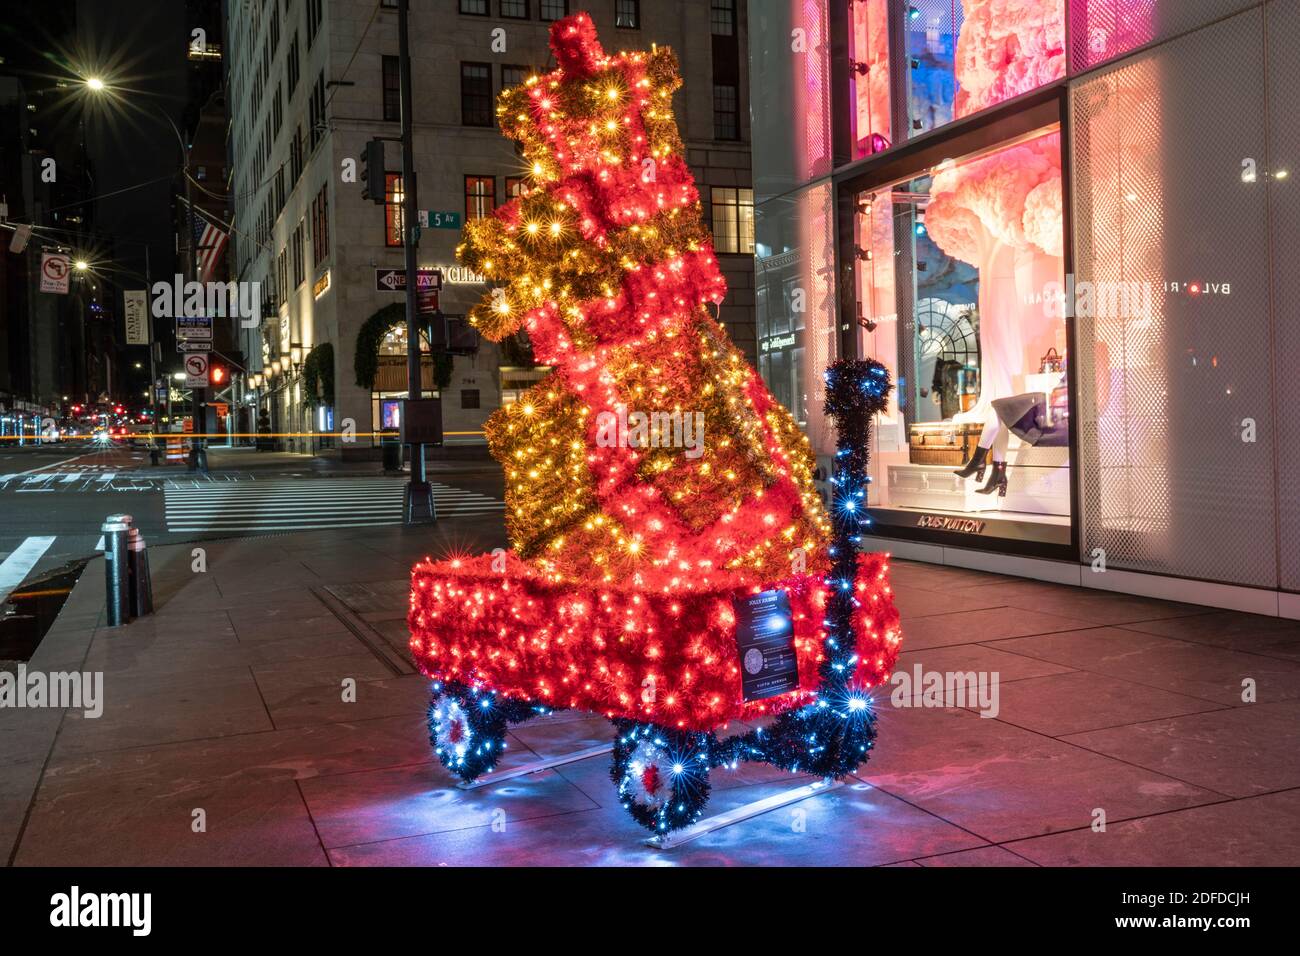 New York, NY - December 3, 2020: Christmas decorations seen all